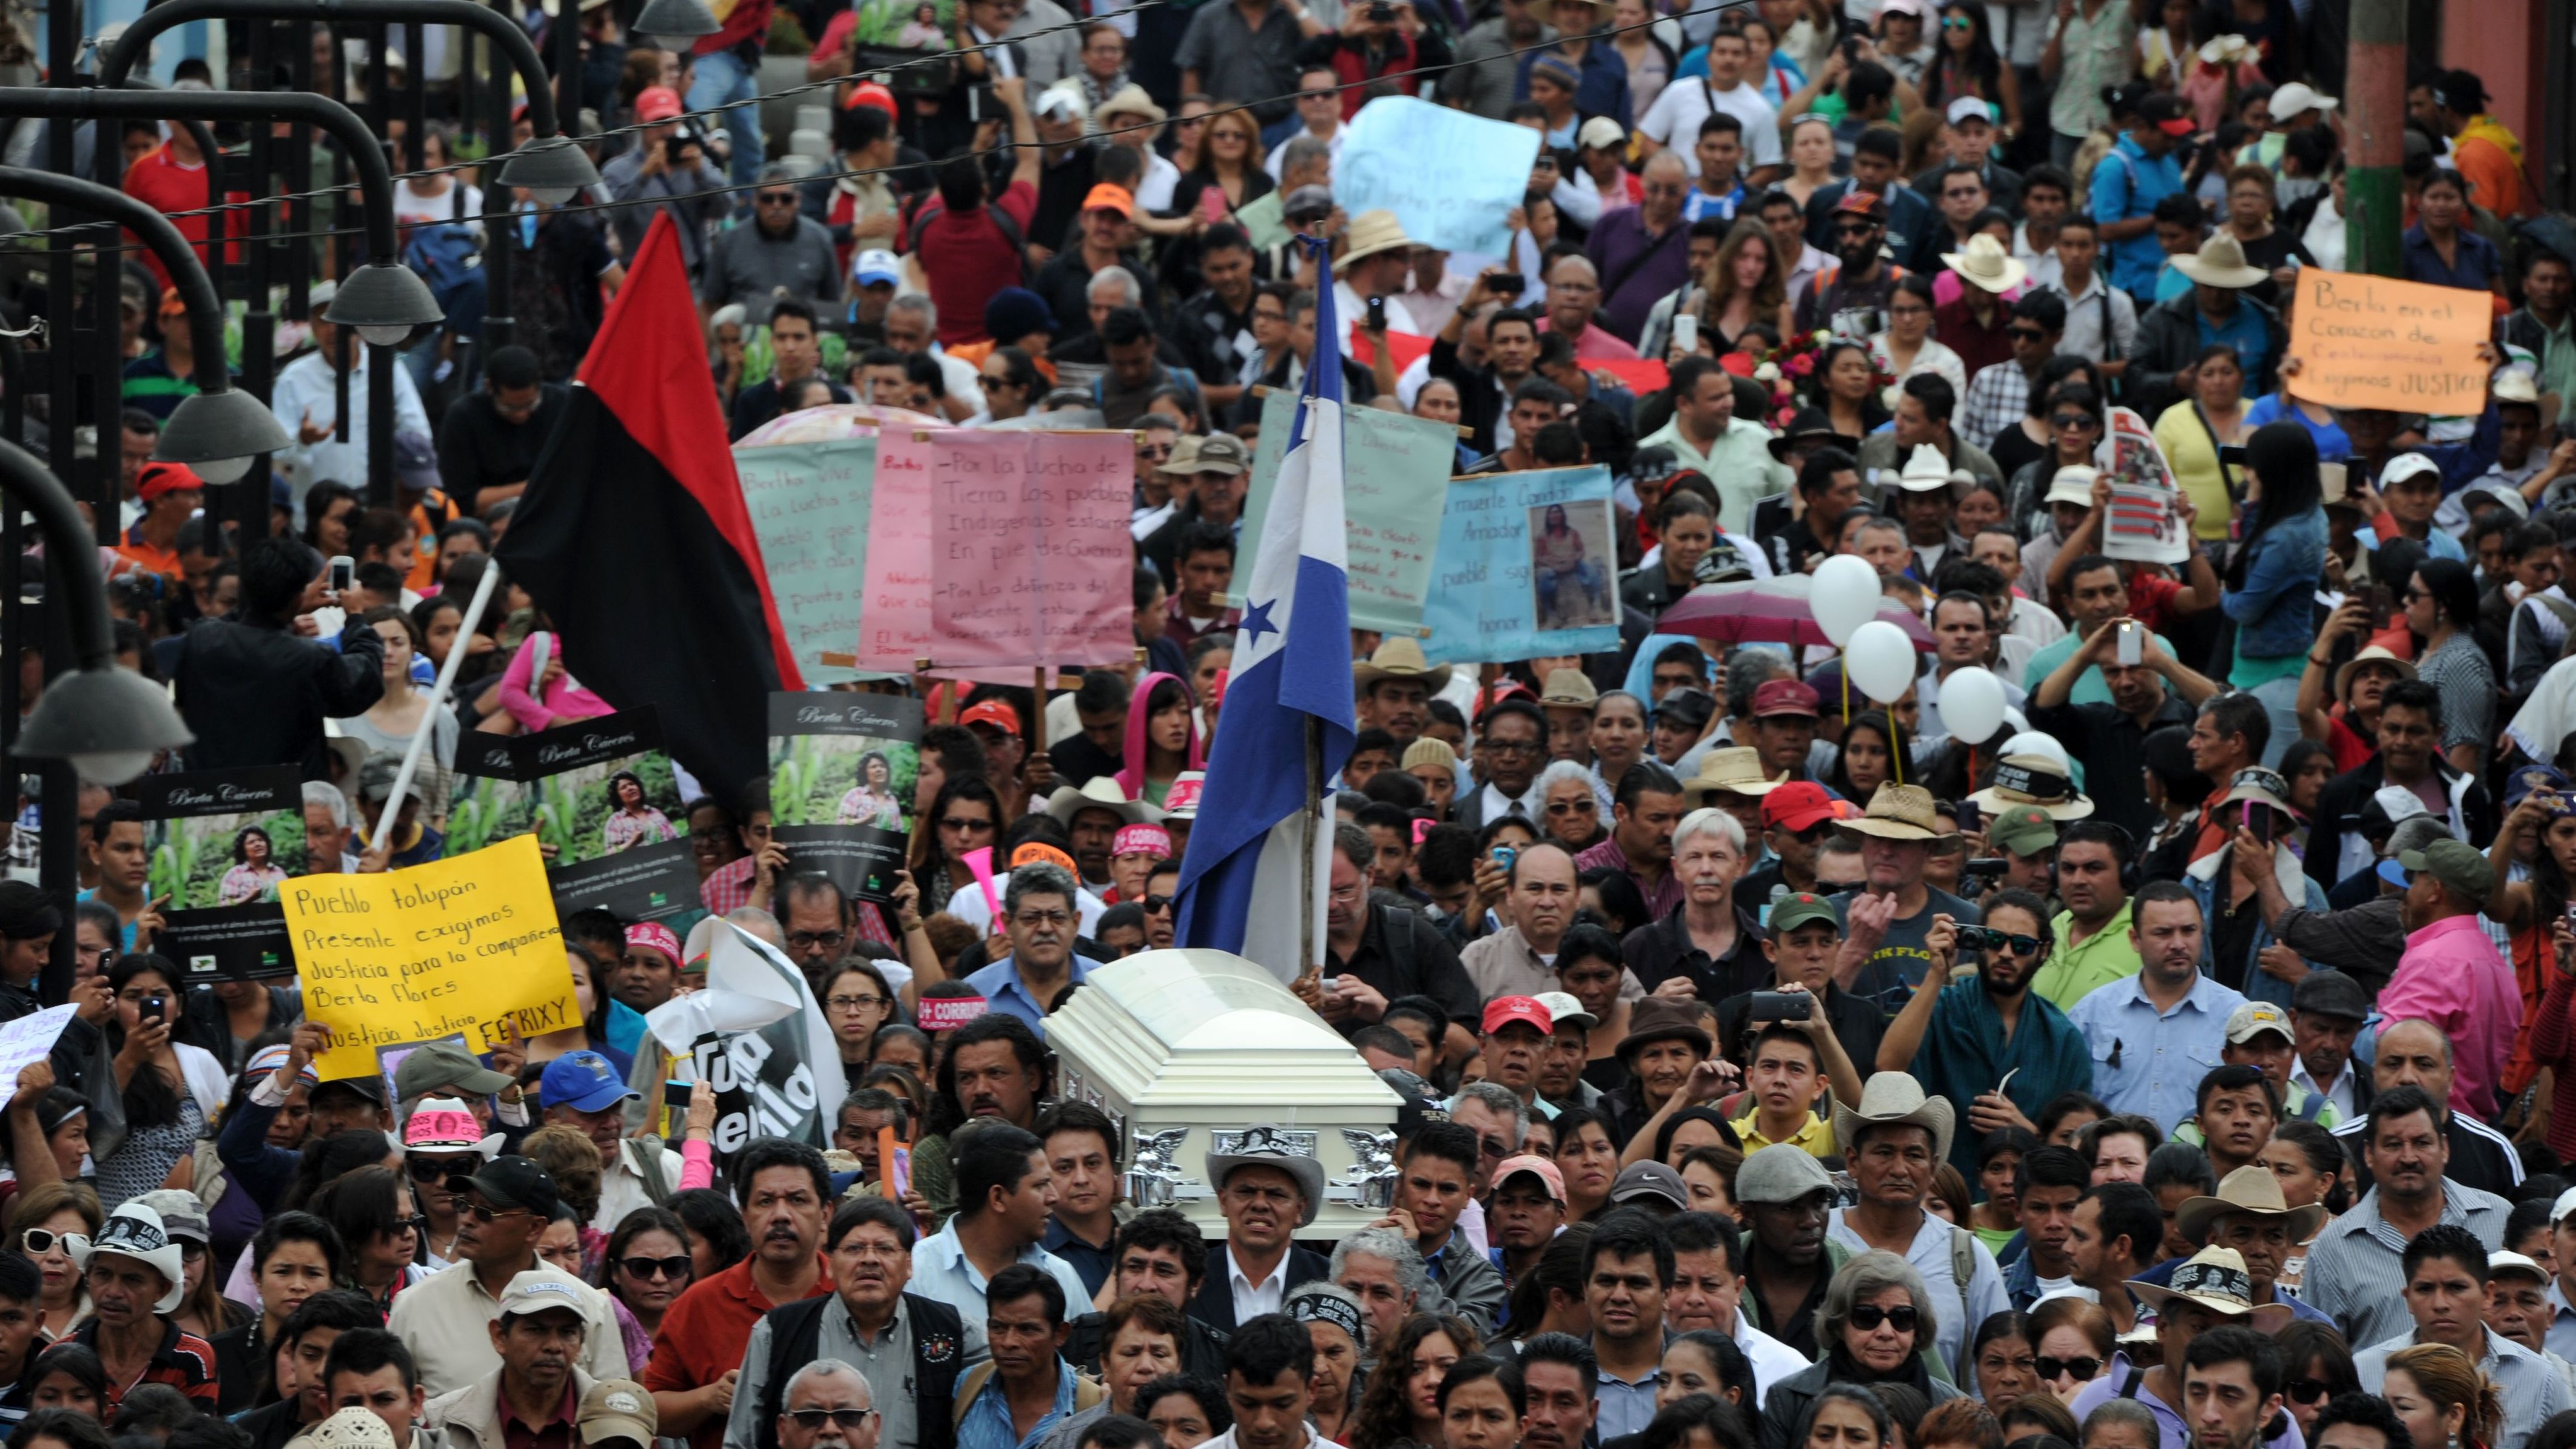 Thousands attend the funeral of Cáceres in her hometown of La Esperanza, Honduras, on March 5, 2016. 